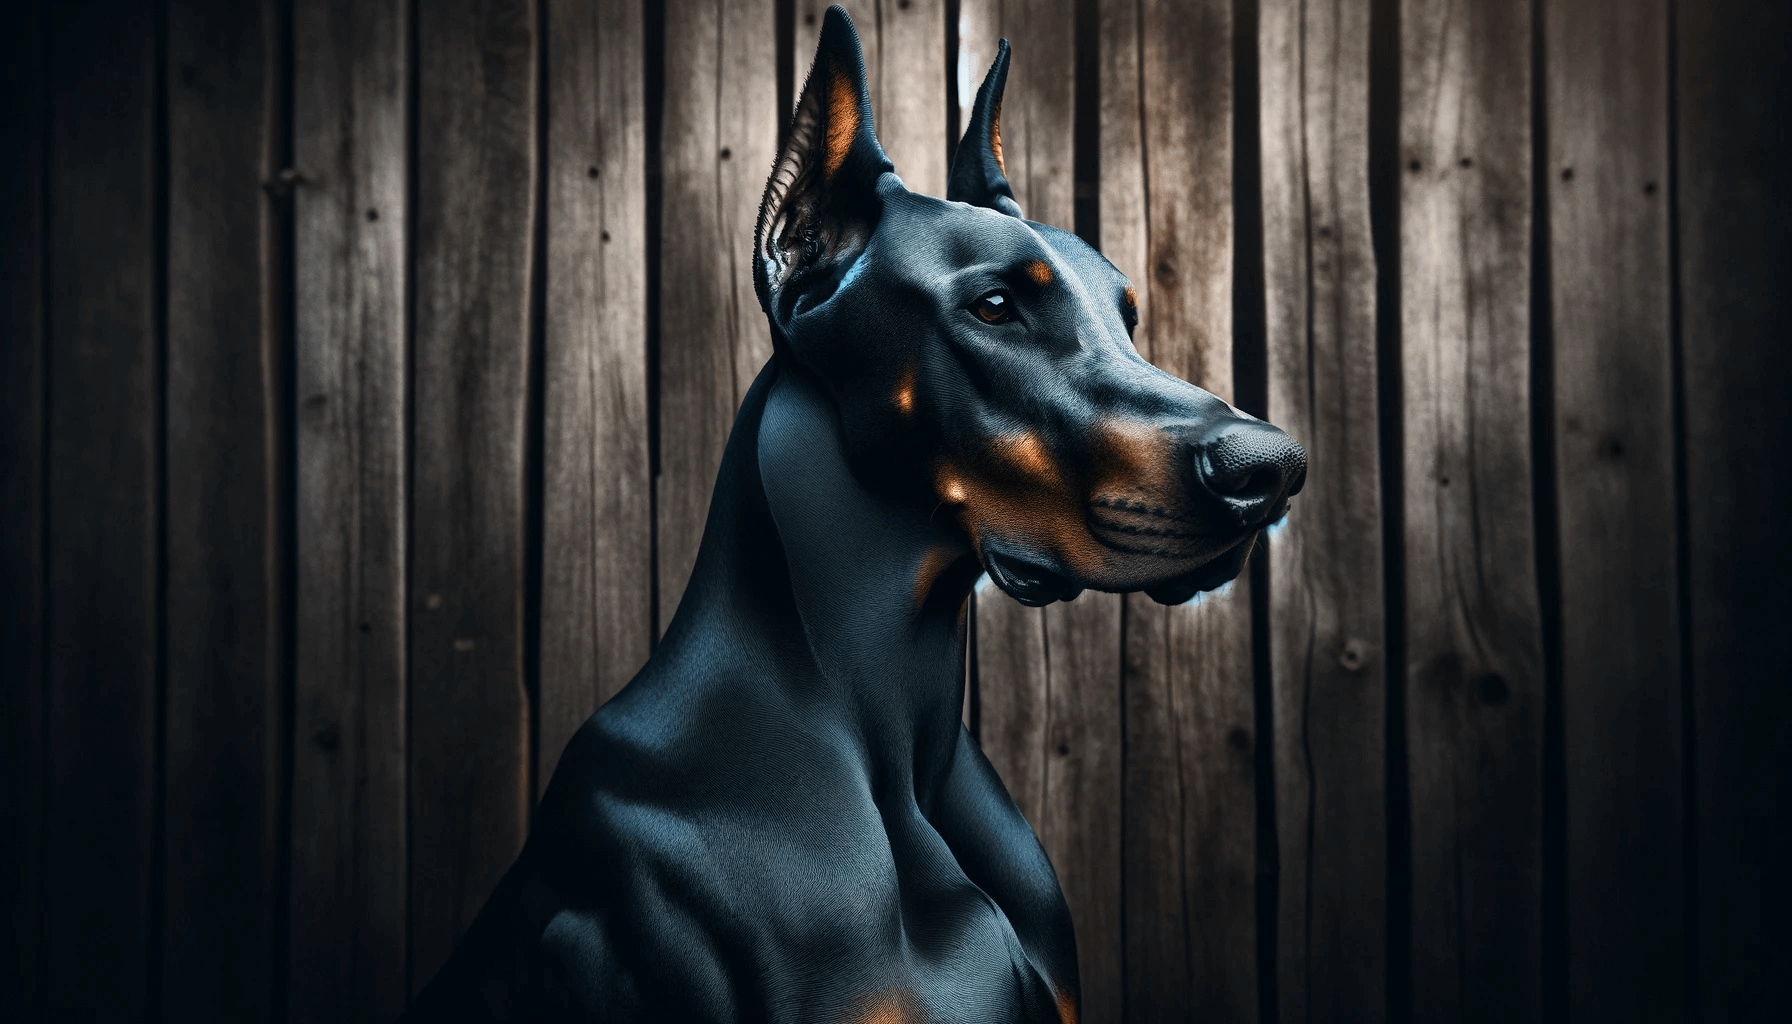 A Blue Doberman in a side profile against a wooden fence, highlighting the breed's muscular structure and noble posture.